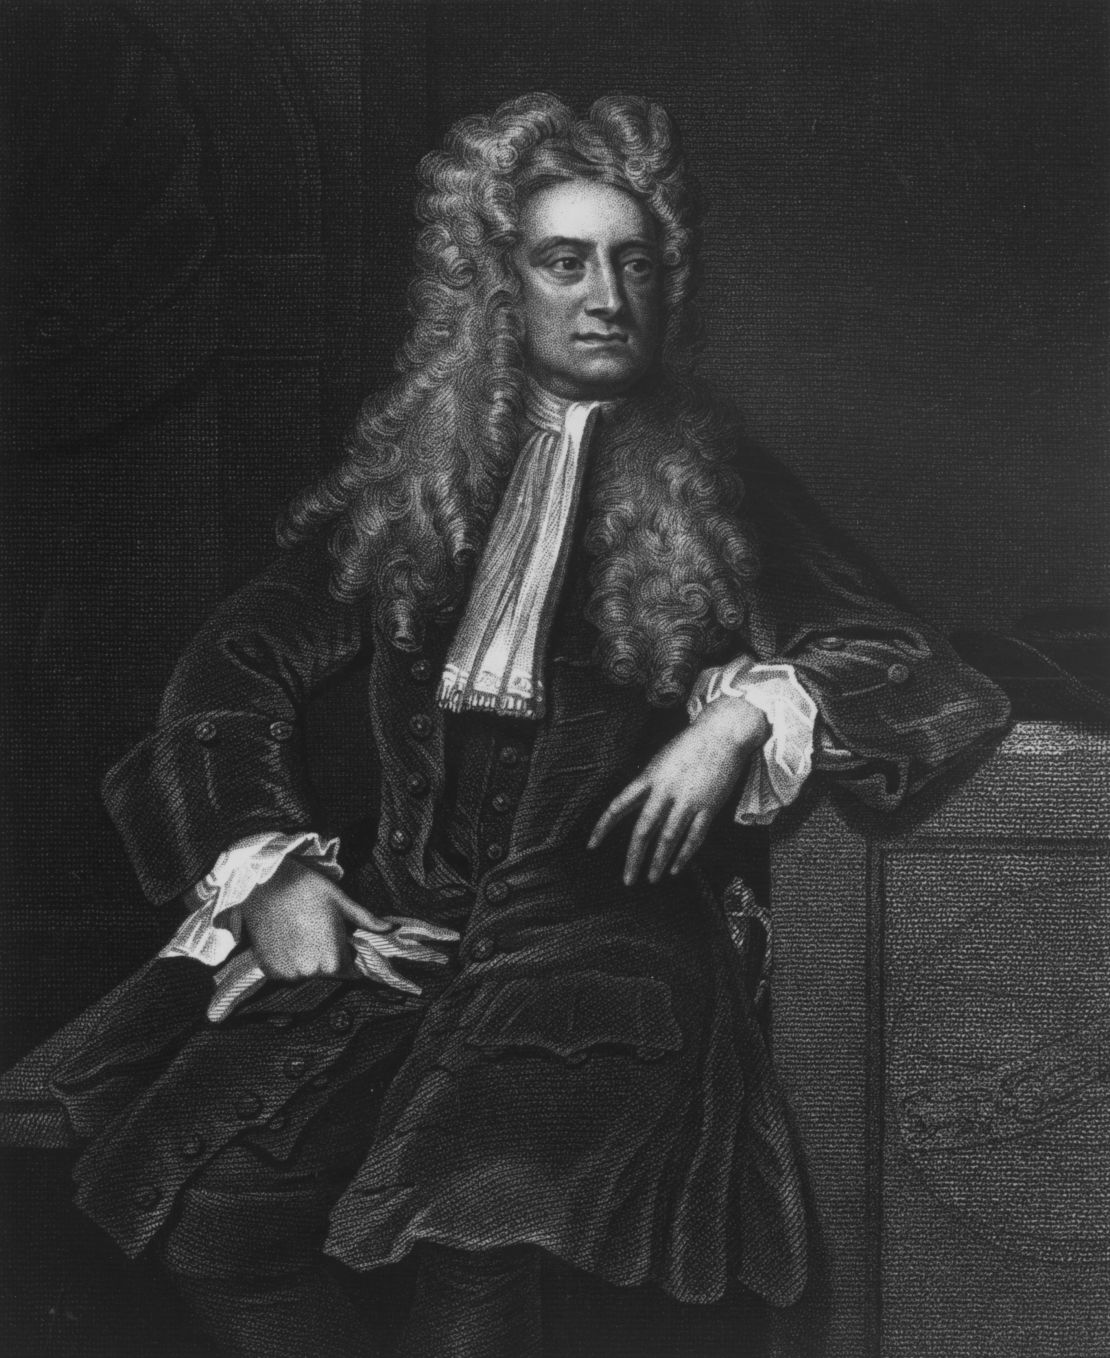 Isaac Newton showed that all bodies attract each other due to gravity